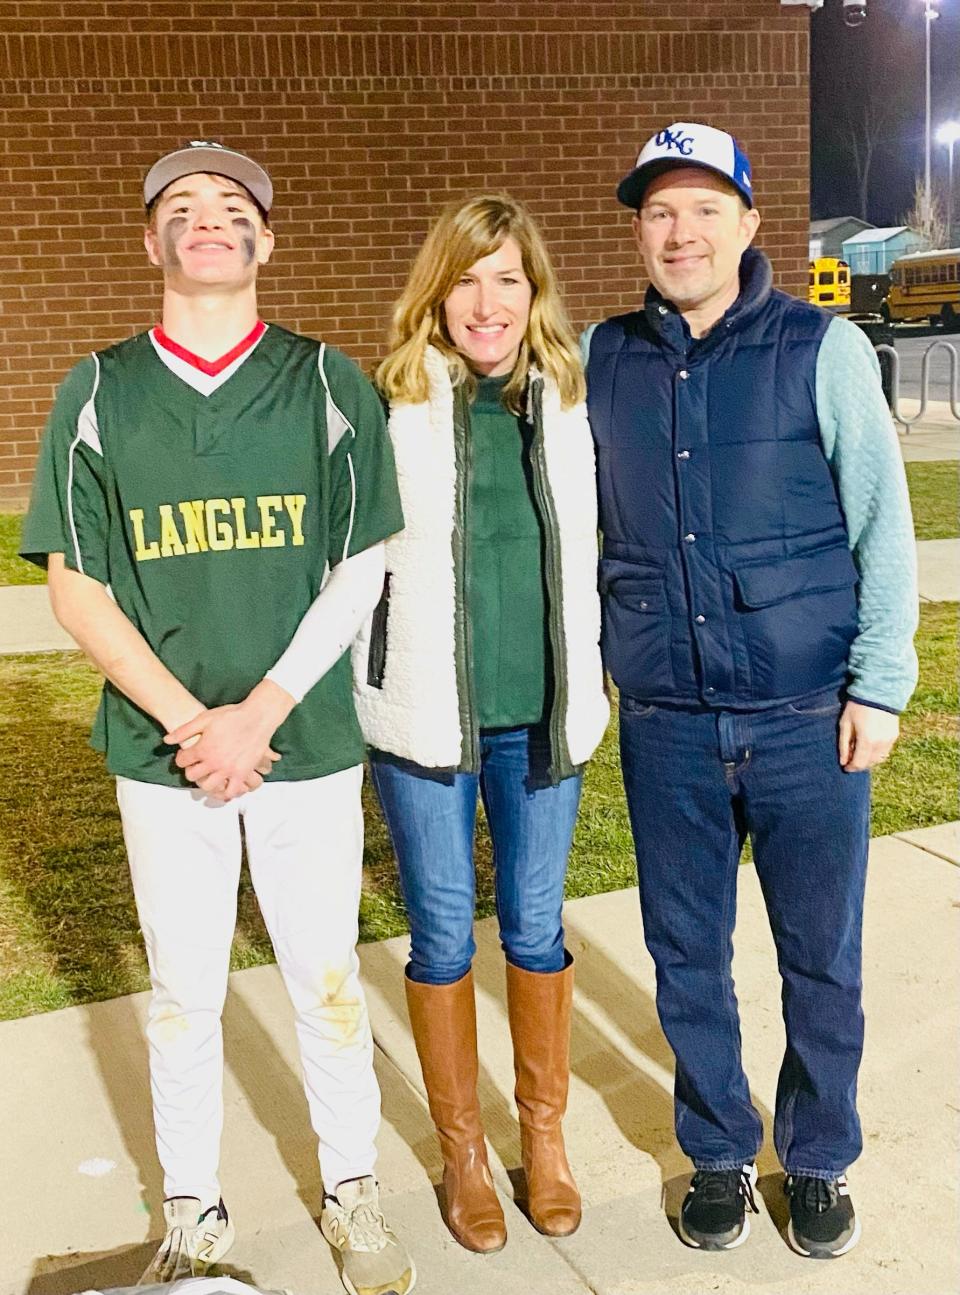 Steve Borelli, right, and his wife, Colleen, are proud sports parents of two sons, including Connor, left, a high school baseball player.